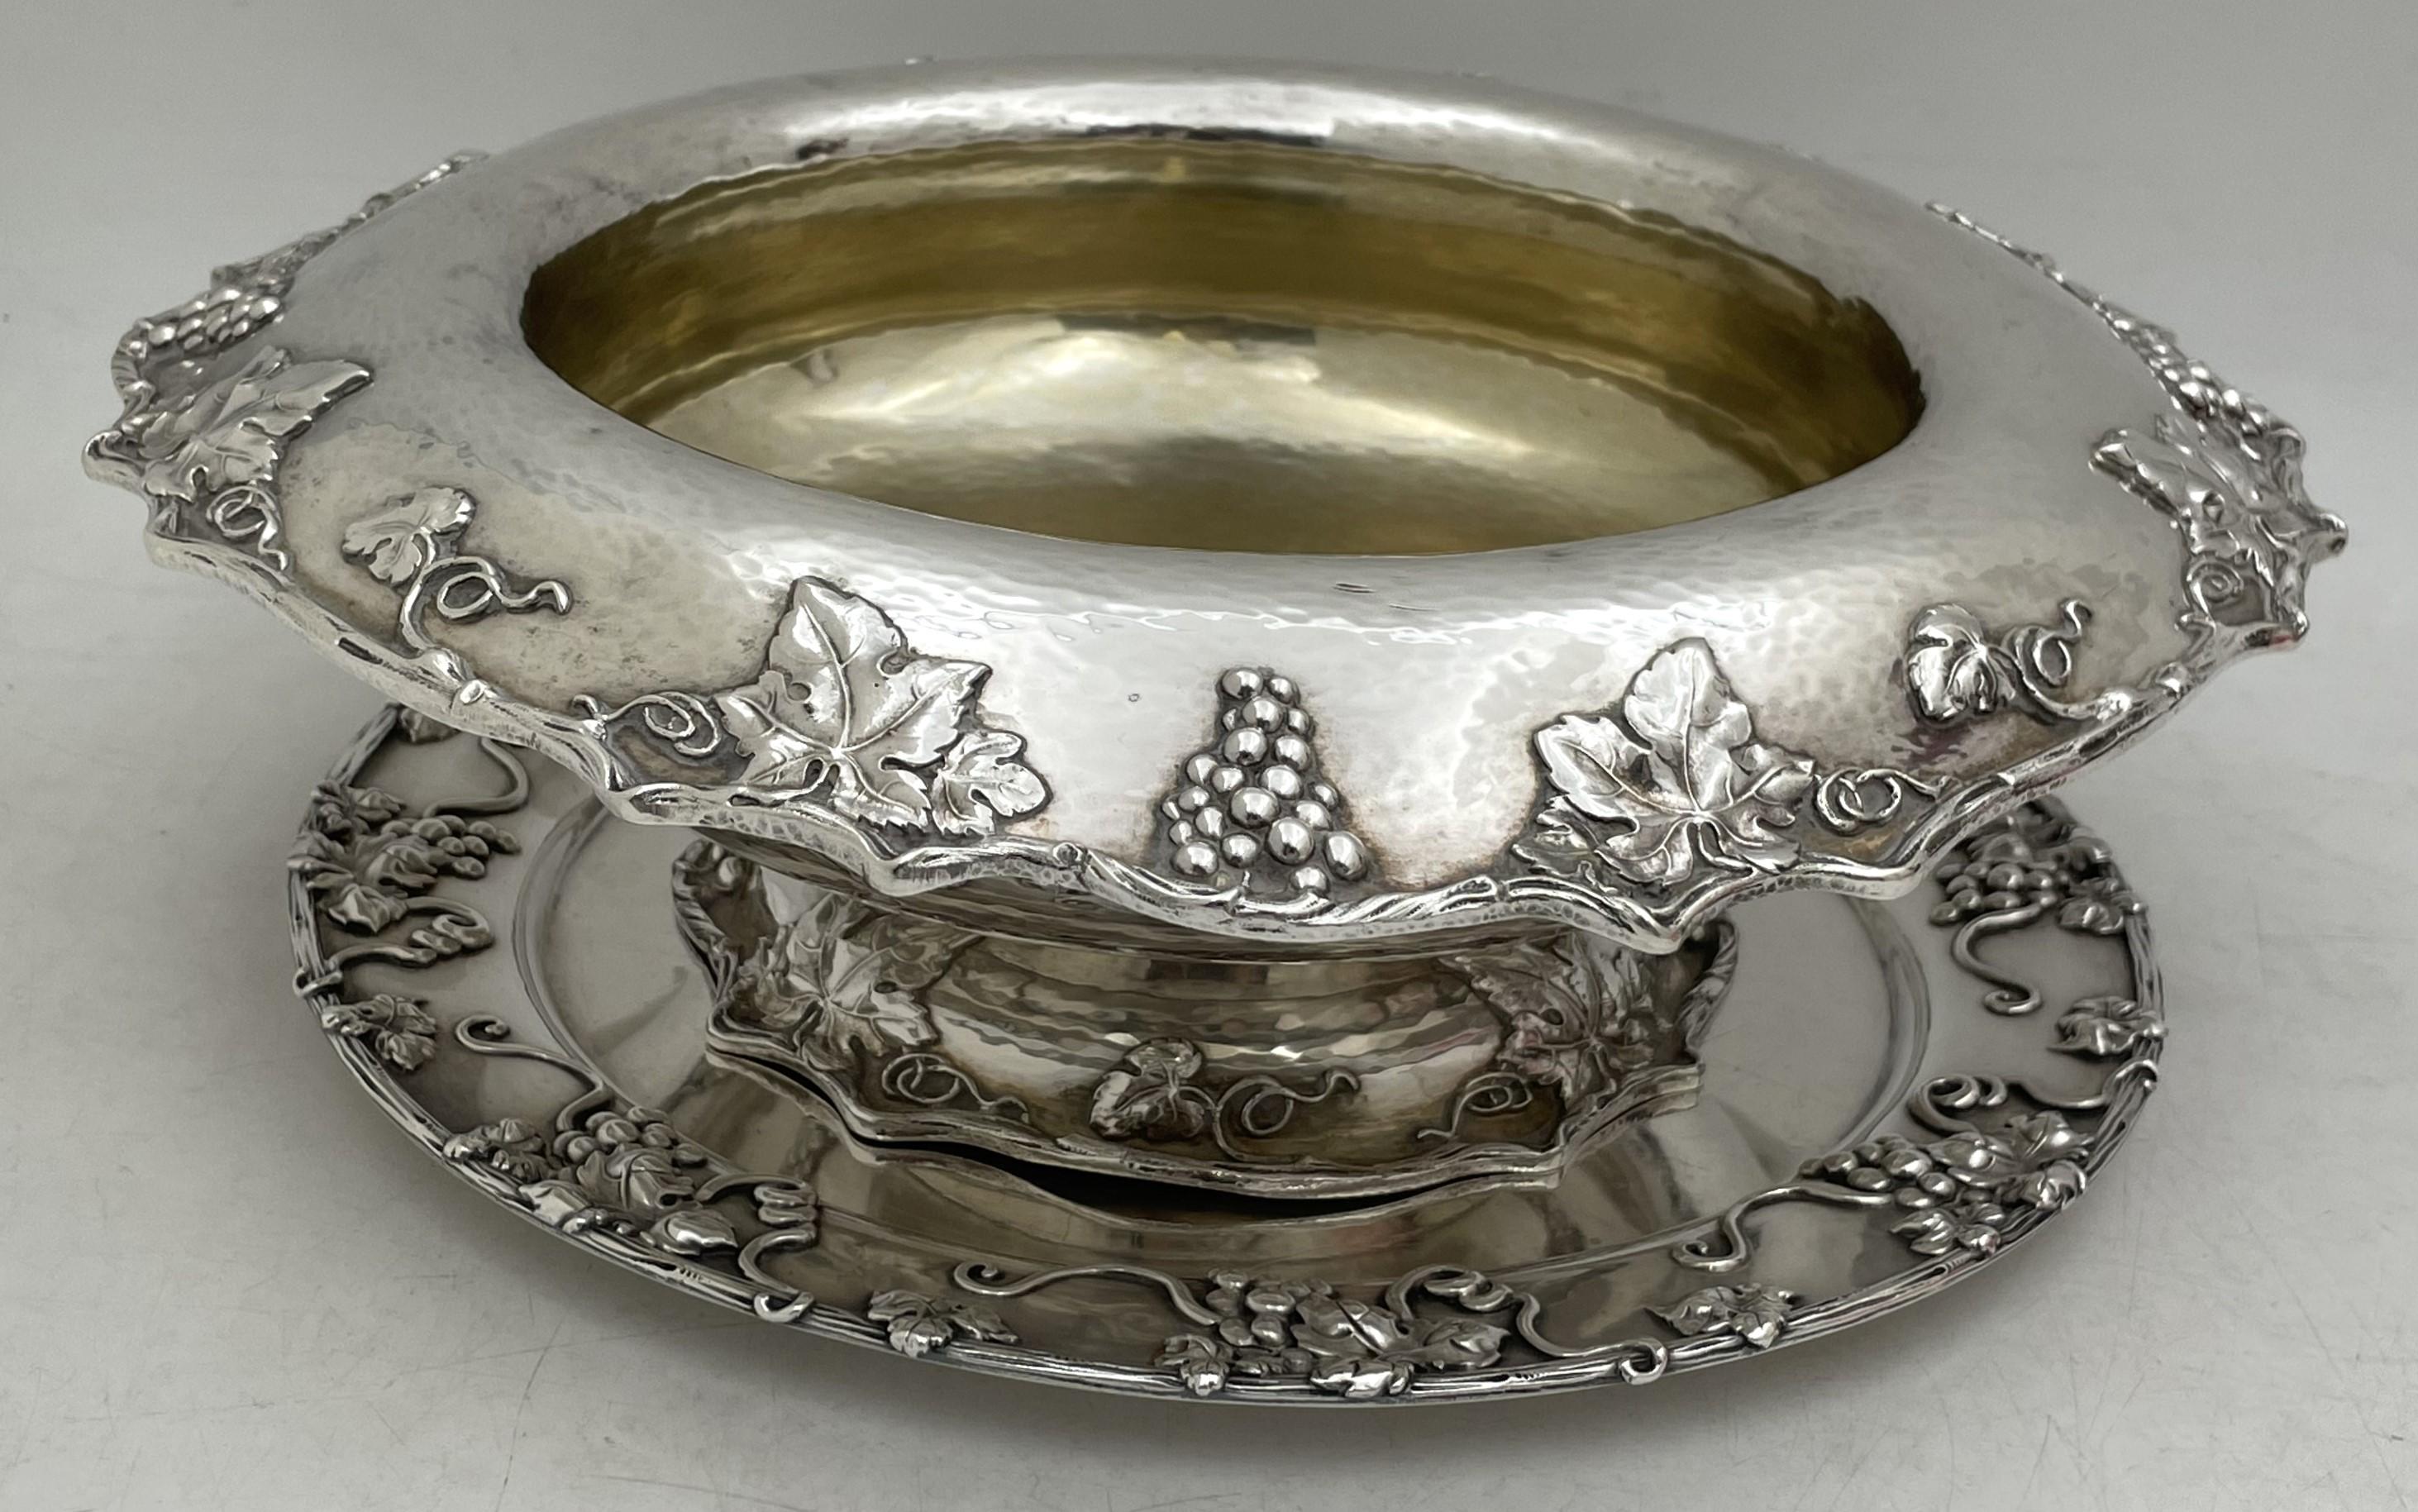 Gorham hand hammered sterling silver centerpiece bowl from 1912, gilt inside, in exquisite Art Nouveau style adorned with raised grape and vine motifs. It measures 12 1/2'' in diameter by 4 1/8'' in height. It is accompanied by a matching Theodore